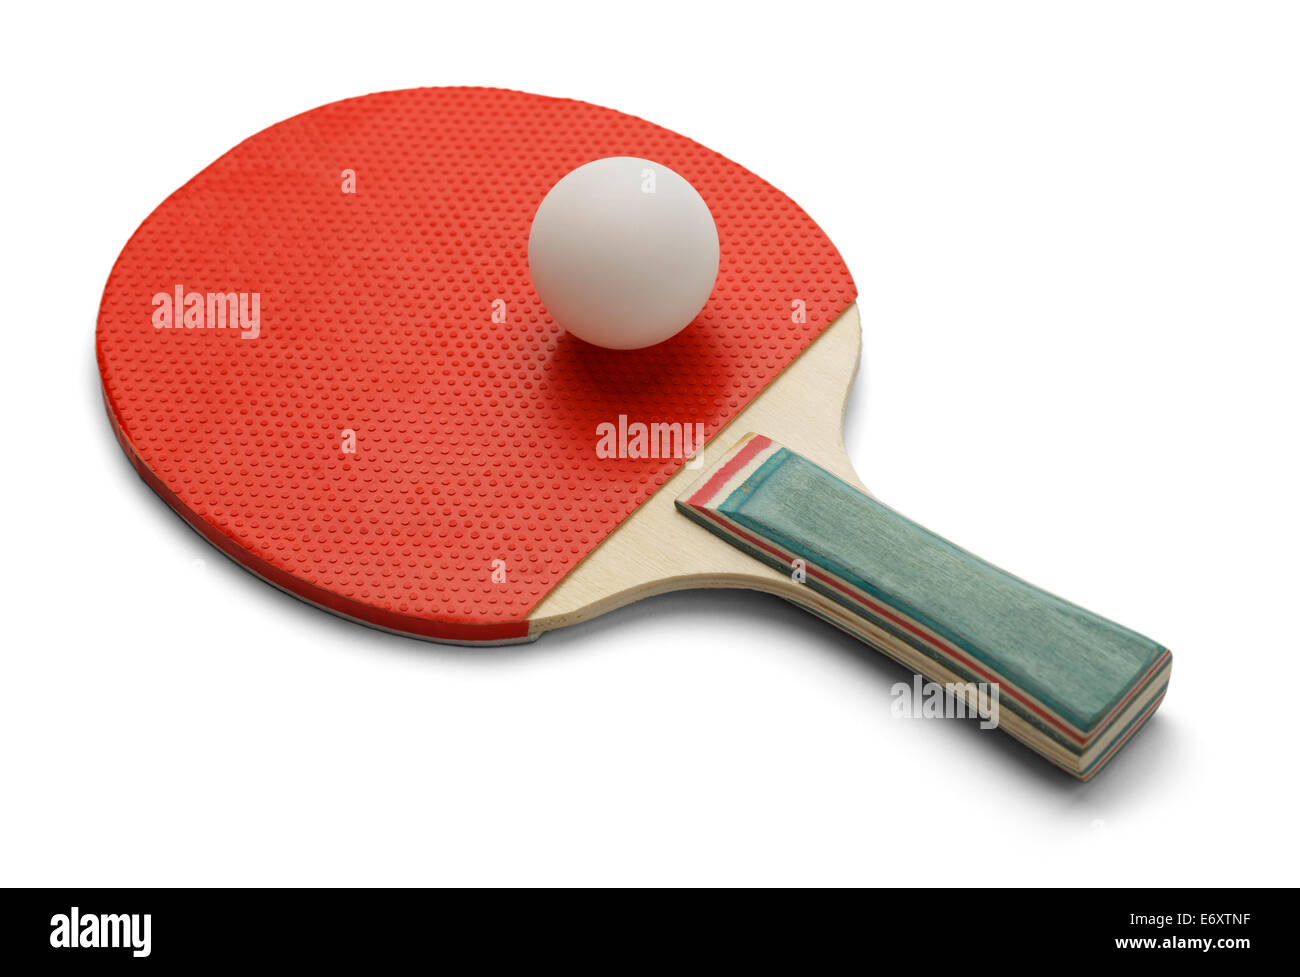 Table Tennis Paddle and Ping Pong Ball Isolated on White Background. Stock Photo